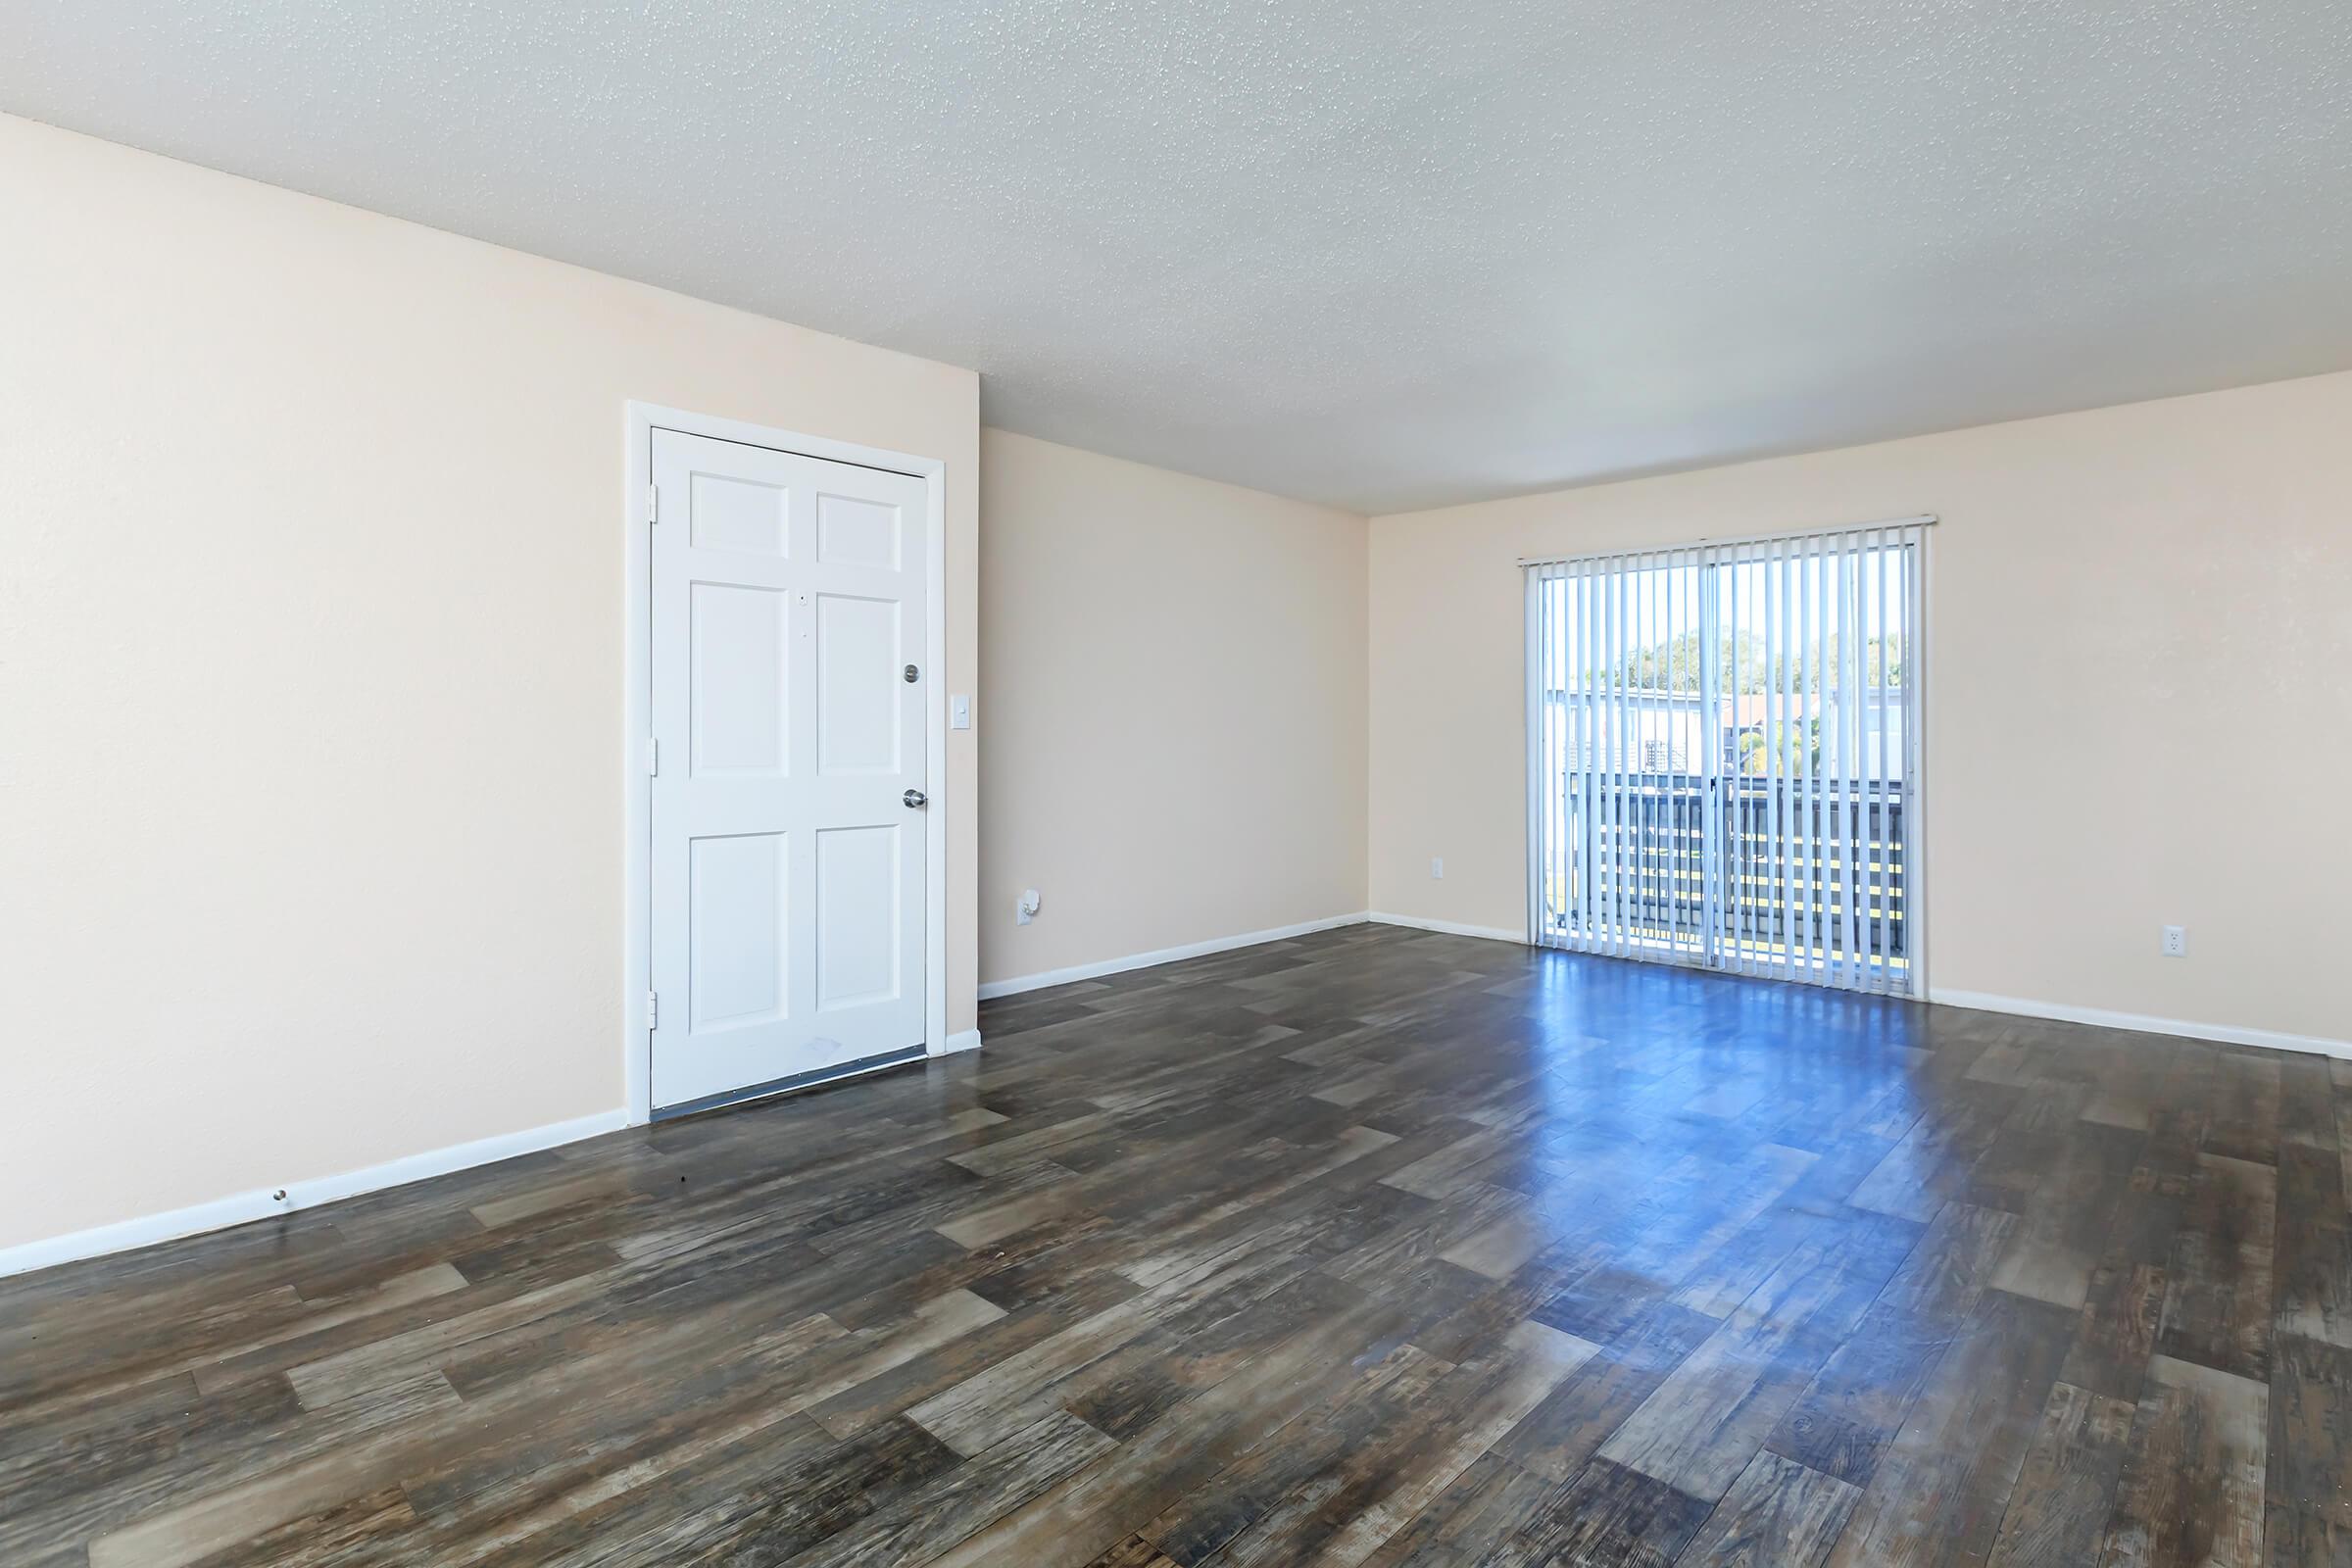 LUXURY WOOD LAMINATE FLOORING IN YOUR LIVING SPACE AT THE CROSSINGS AT 66TH APARTMENTS